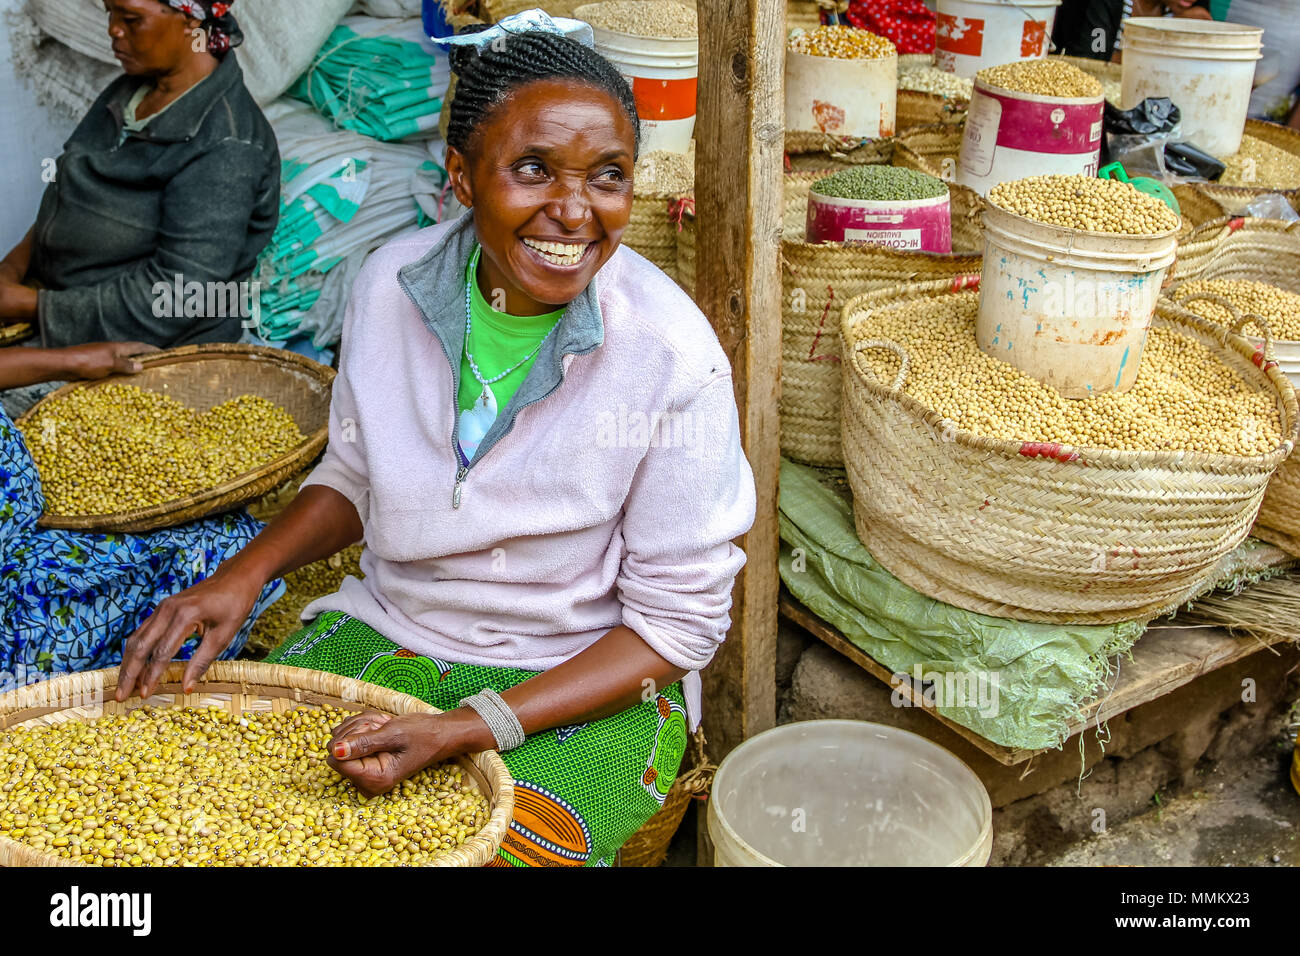 Arusha, Tanzania, Africa - January 2, 2013: Happy woman selling cereals at famous town market of Arusha Stock Photo